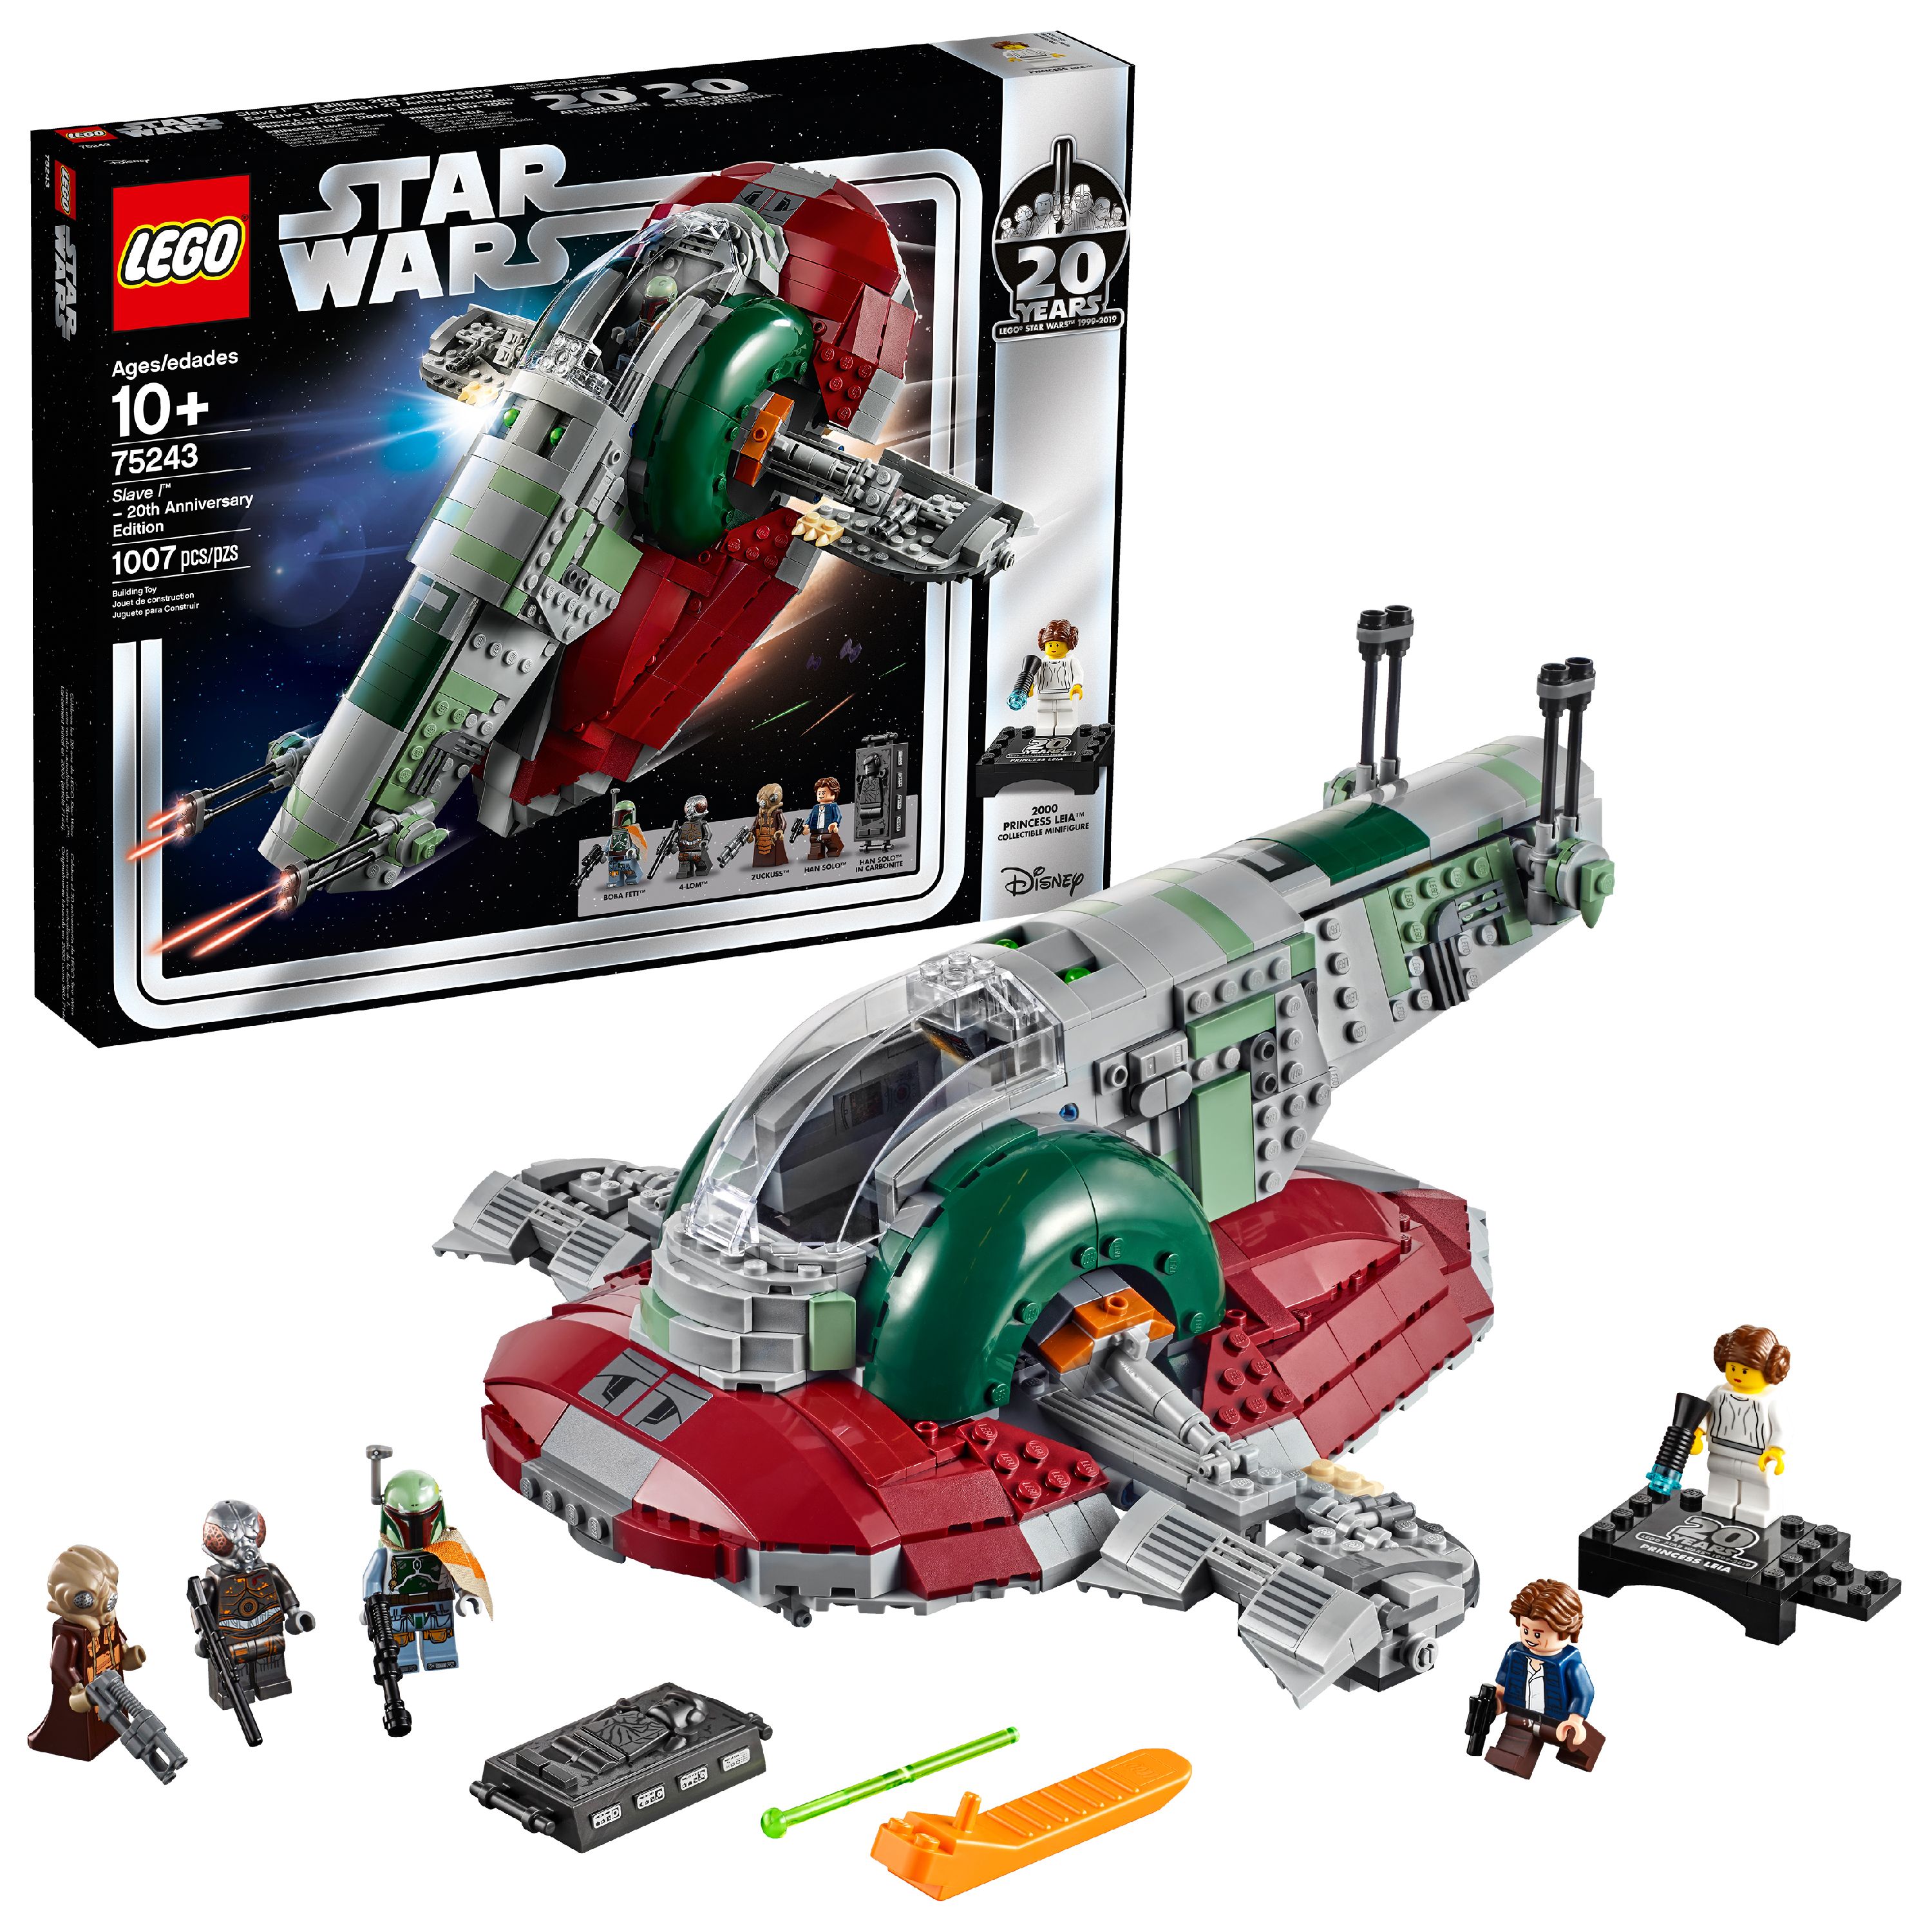 LEGO 75243 Star Wars Slave 20th Anniversary Collector Edition Collectible Model Building Kit - image 1 of 8